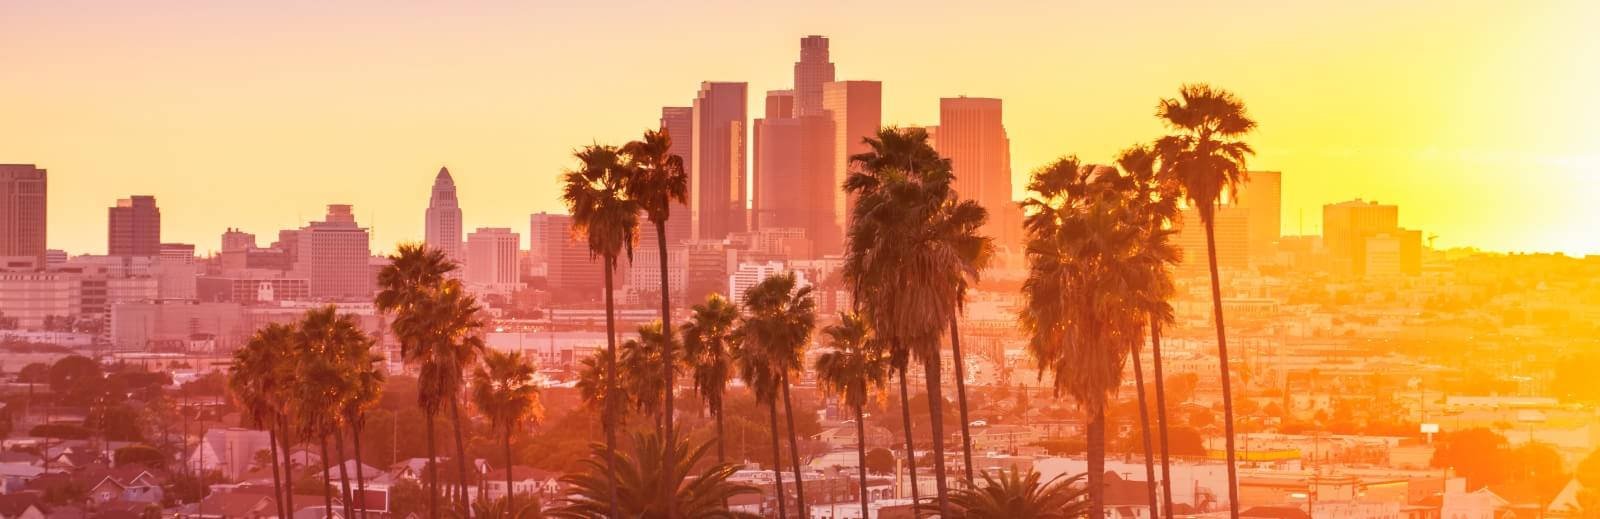 Los Angeles City Skyline During Sunset Wallpaper